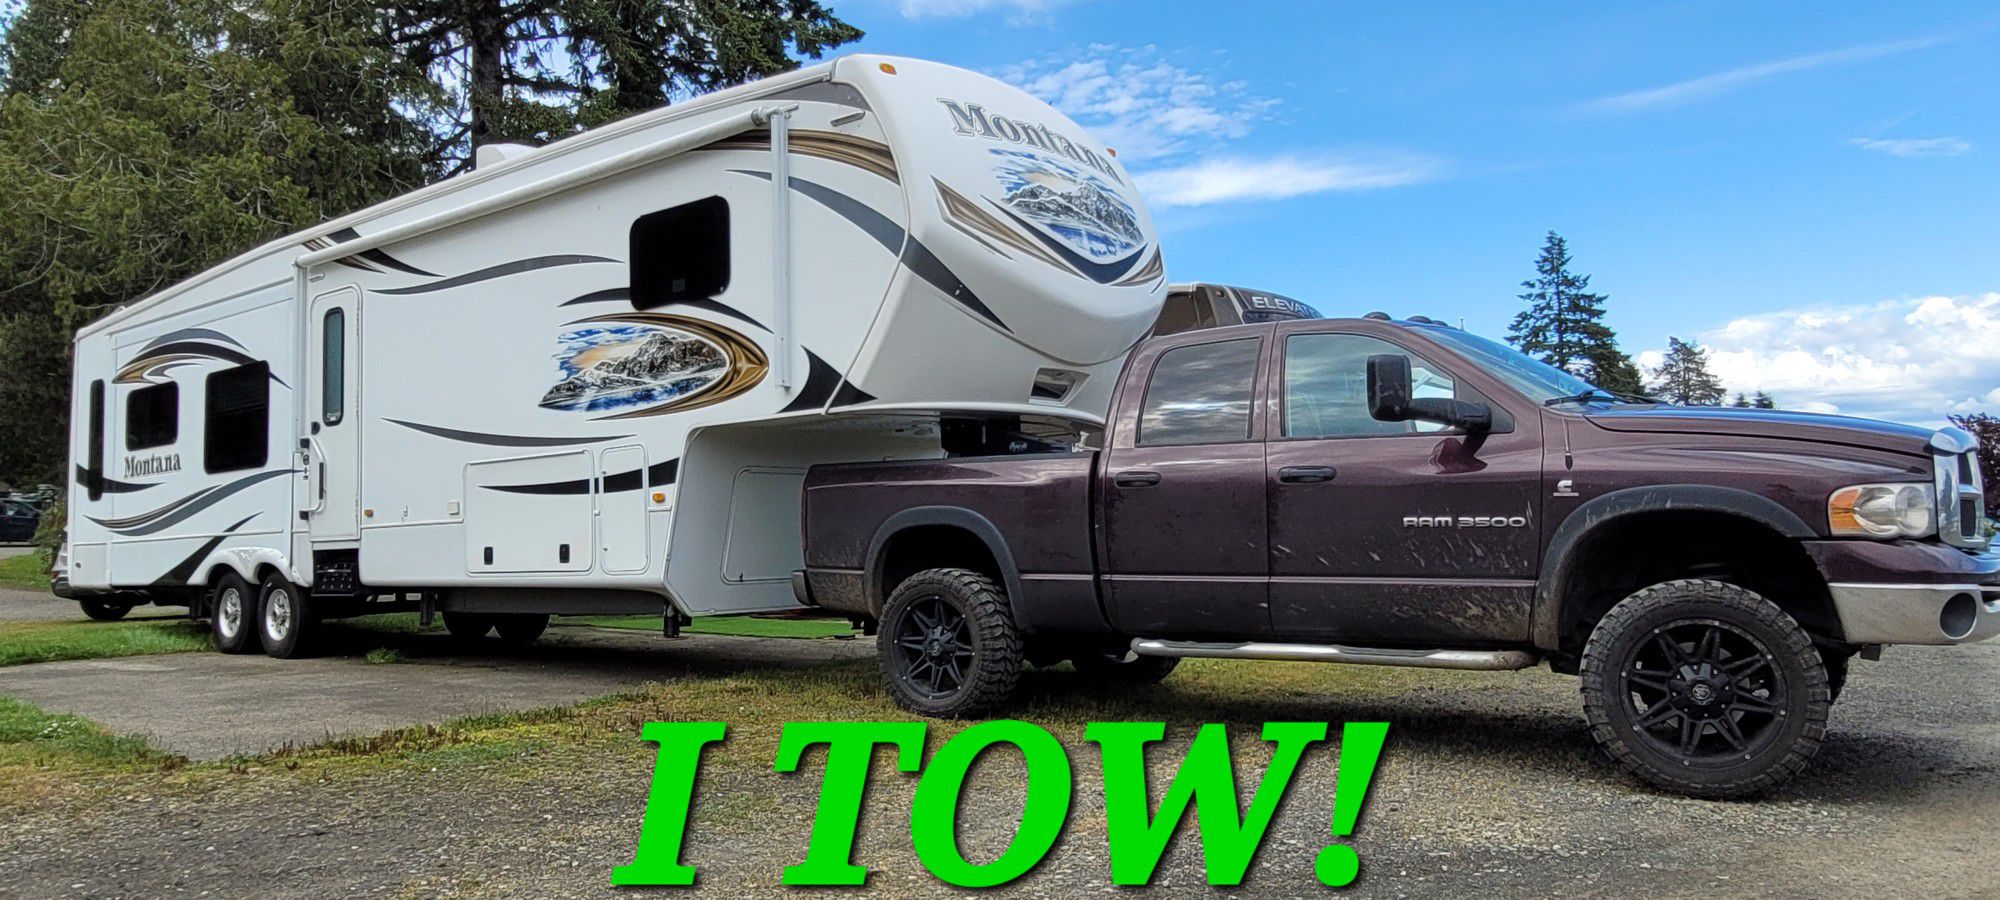 Towing Rvs And More